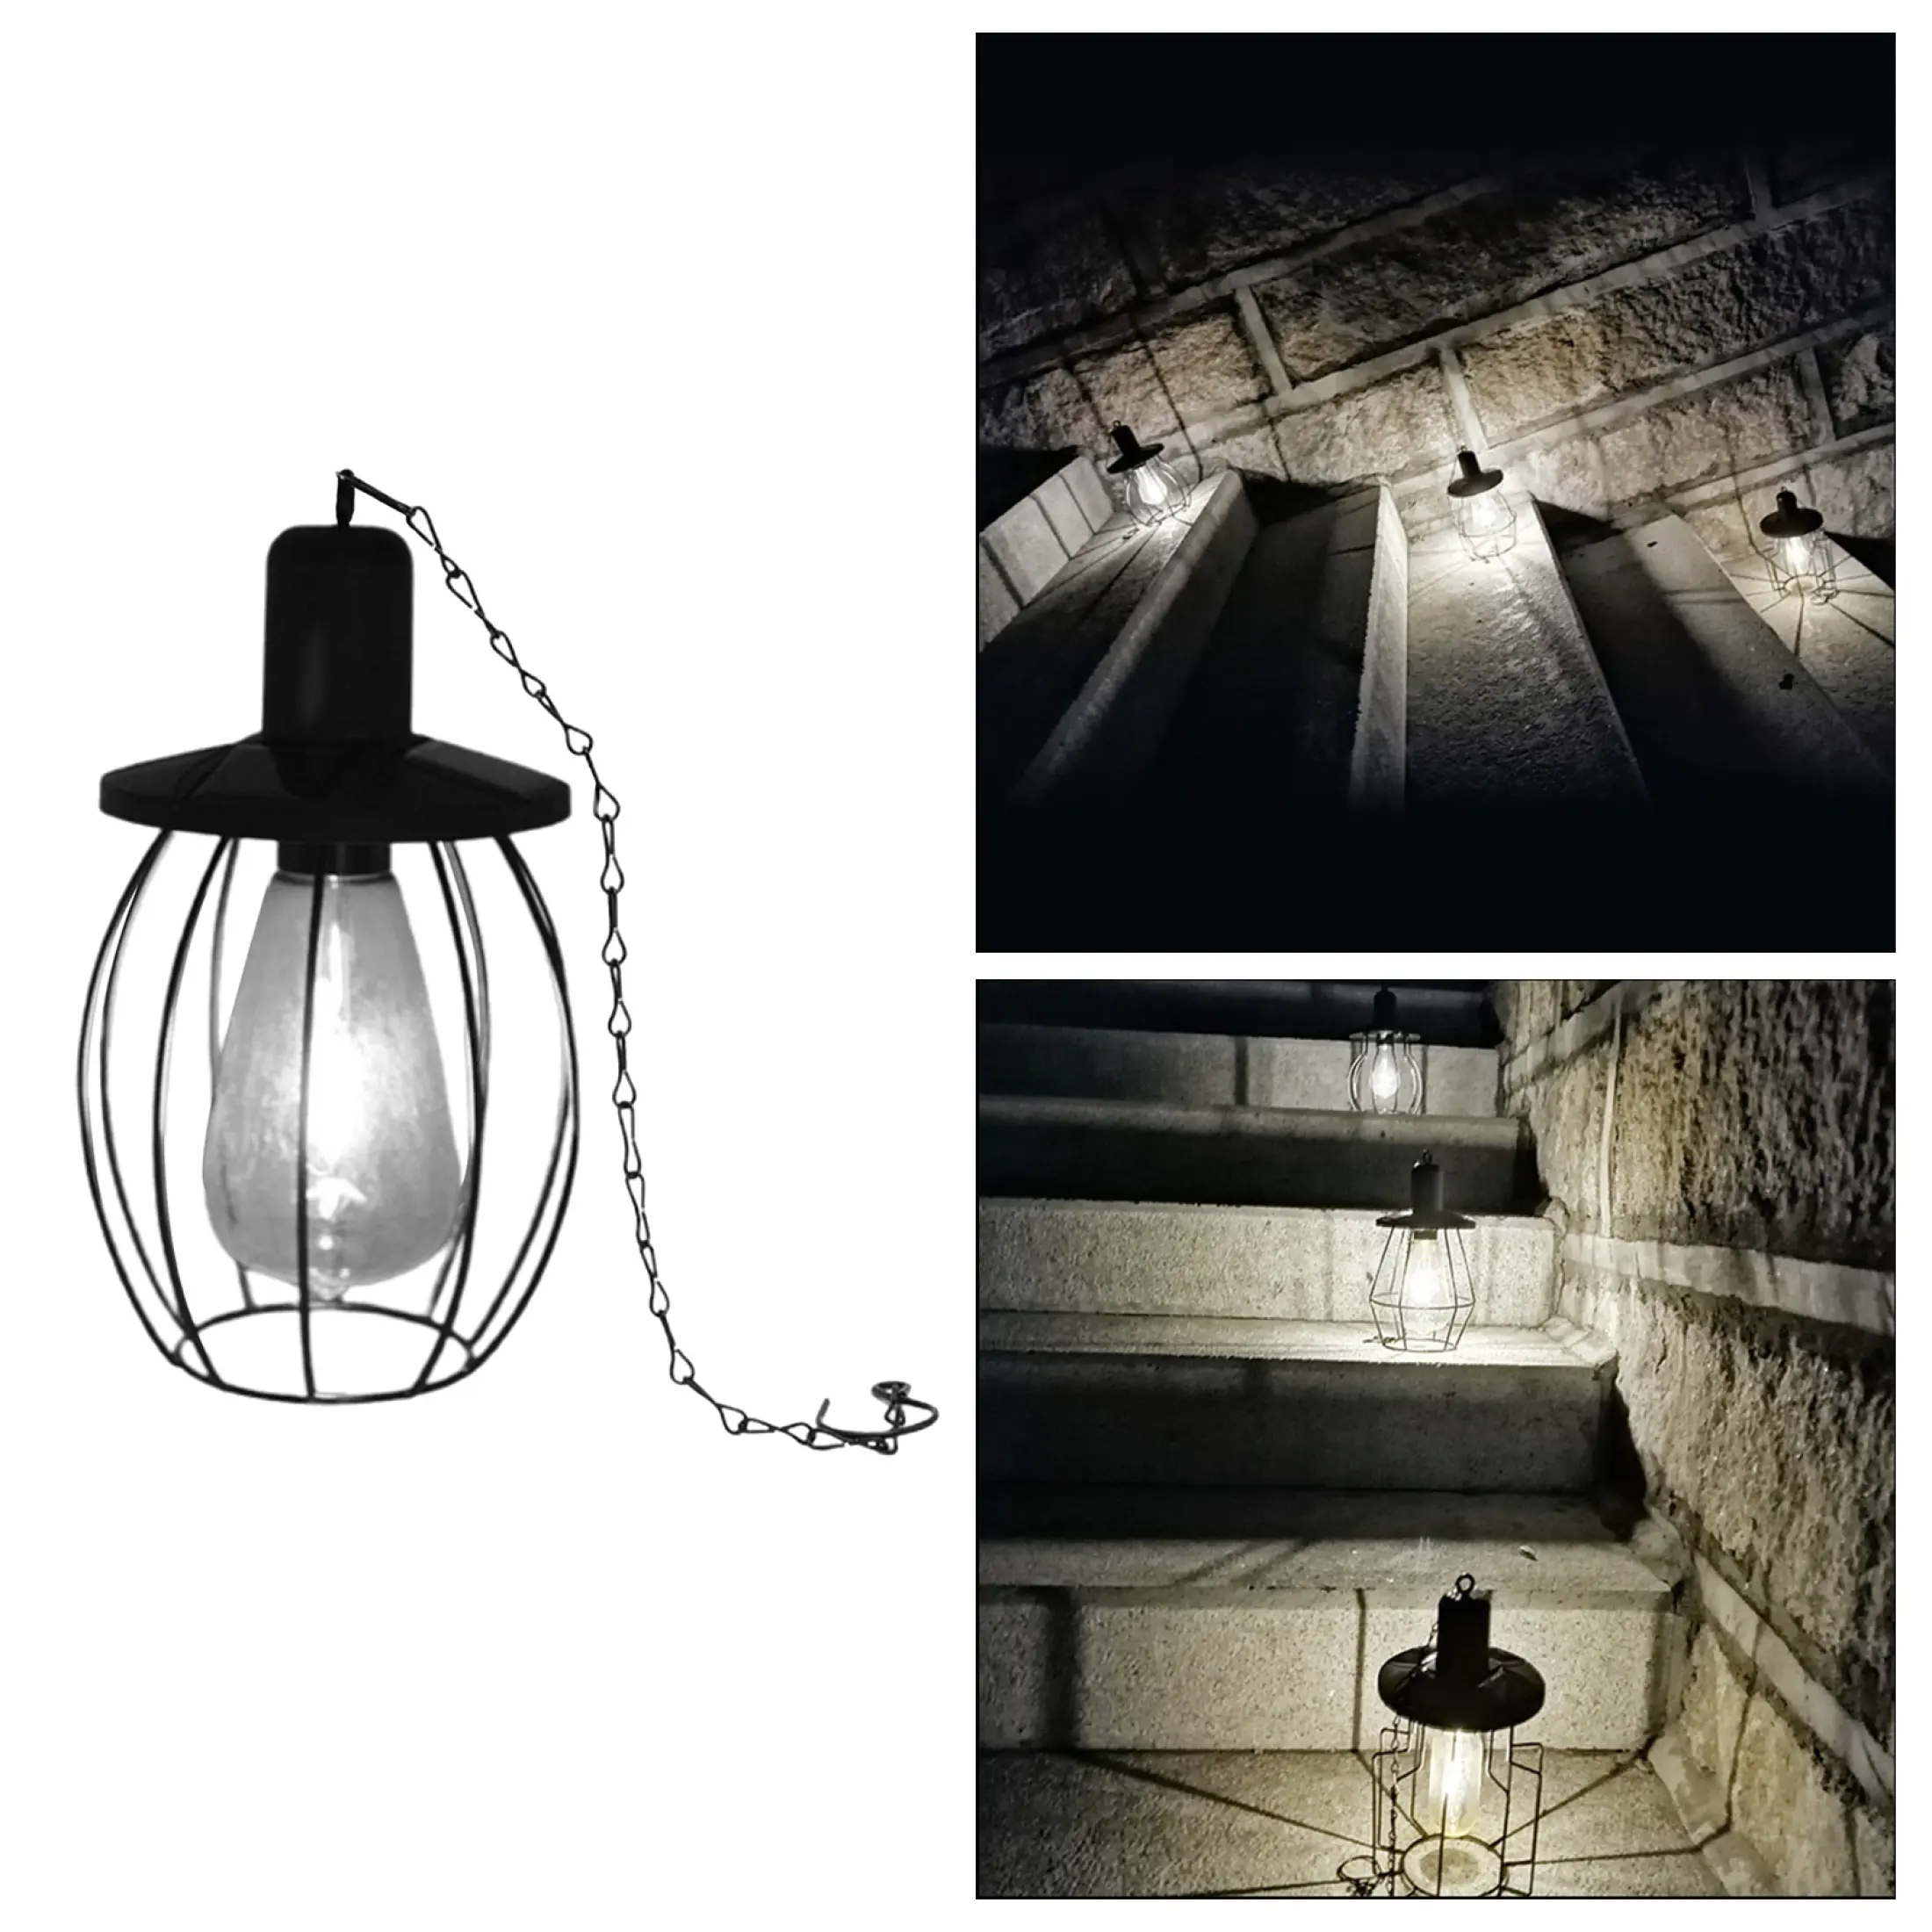 Fityle Retro Solar Ceiling Light Decorative Garden Lawn Yard Led Pendant Lights Cage Cover Powered Lamp Waterproof Save Energy For Outdoor Backyard Lazada Ph - Ceiling Light Outdoor Waterproof Garden Yard Lamp